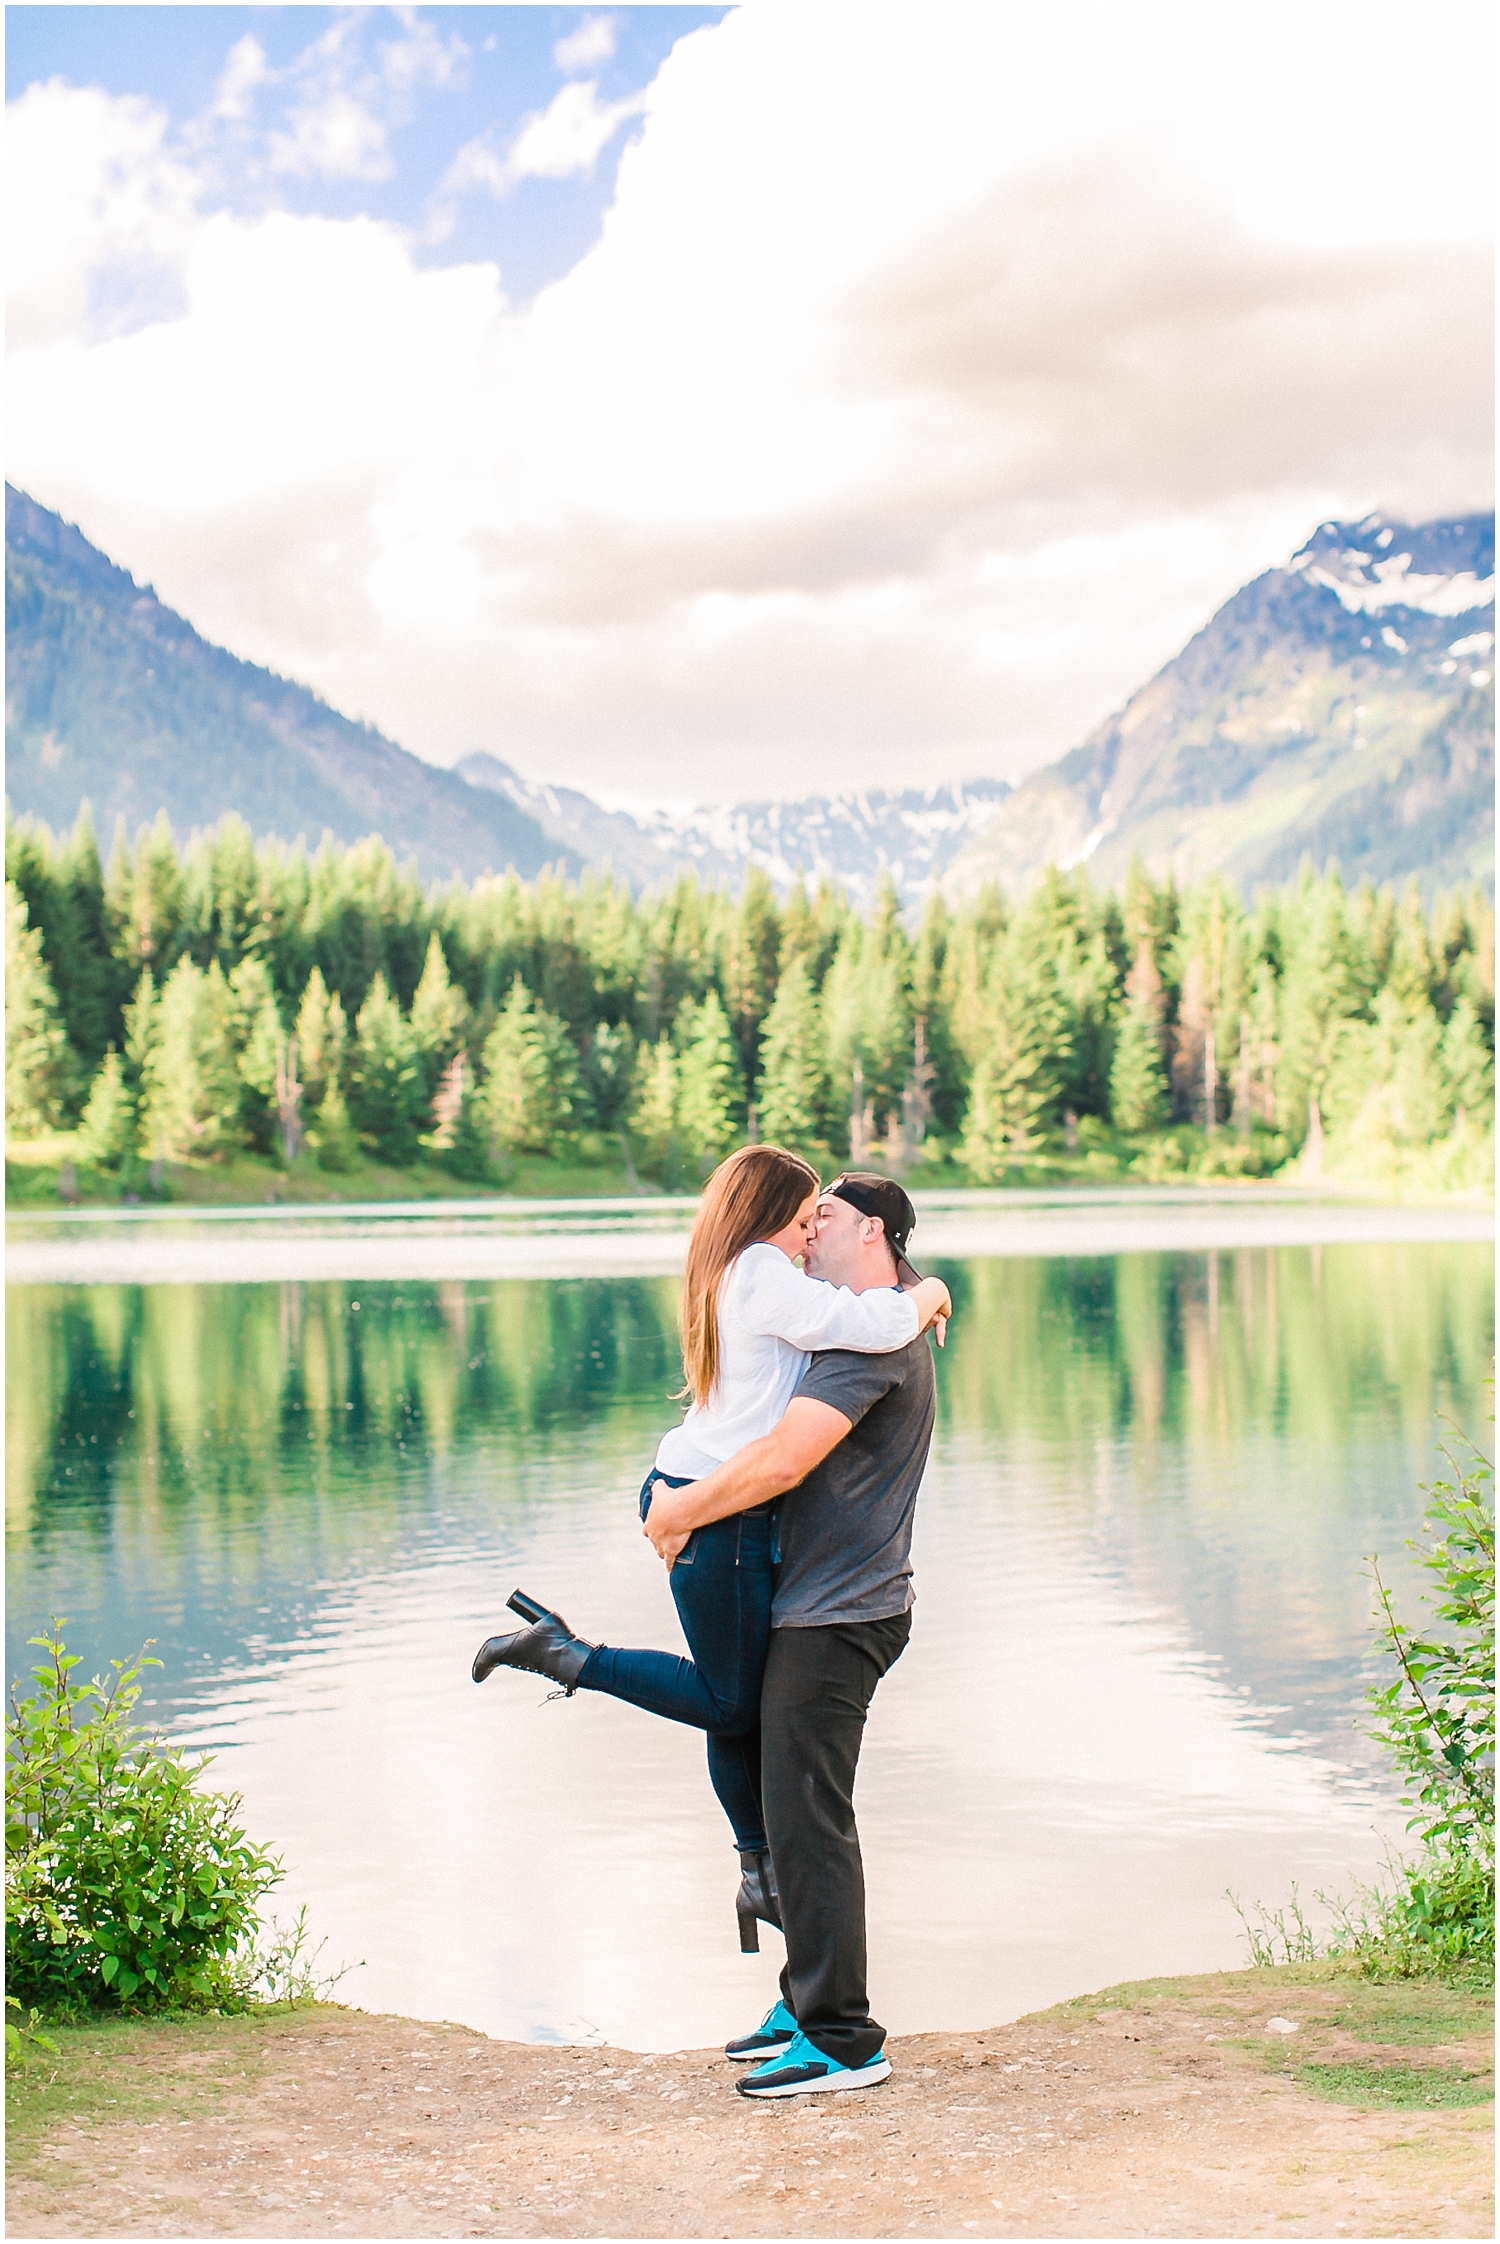 Summer Gold Creek Pond Engagement Session, Gold Creek Pond engagement session, Gold Creek Pond, Snoqualmie Engagement Session, Seattle Wedding Photographer, Seattle Engagement Photographer, Seattle Wedding Photography, Seattle Wedding Photos, Snohomish Wedding Photographer, Snohomish Wedding Photography, Snohomish Wedding photos, Adventure Engagement Photographer, Pacific Northwest Engagement Photographer, Pacific Northwest Wedding Photographer, Washington Wedding Photographer, Washington Wedding Photography